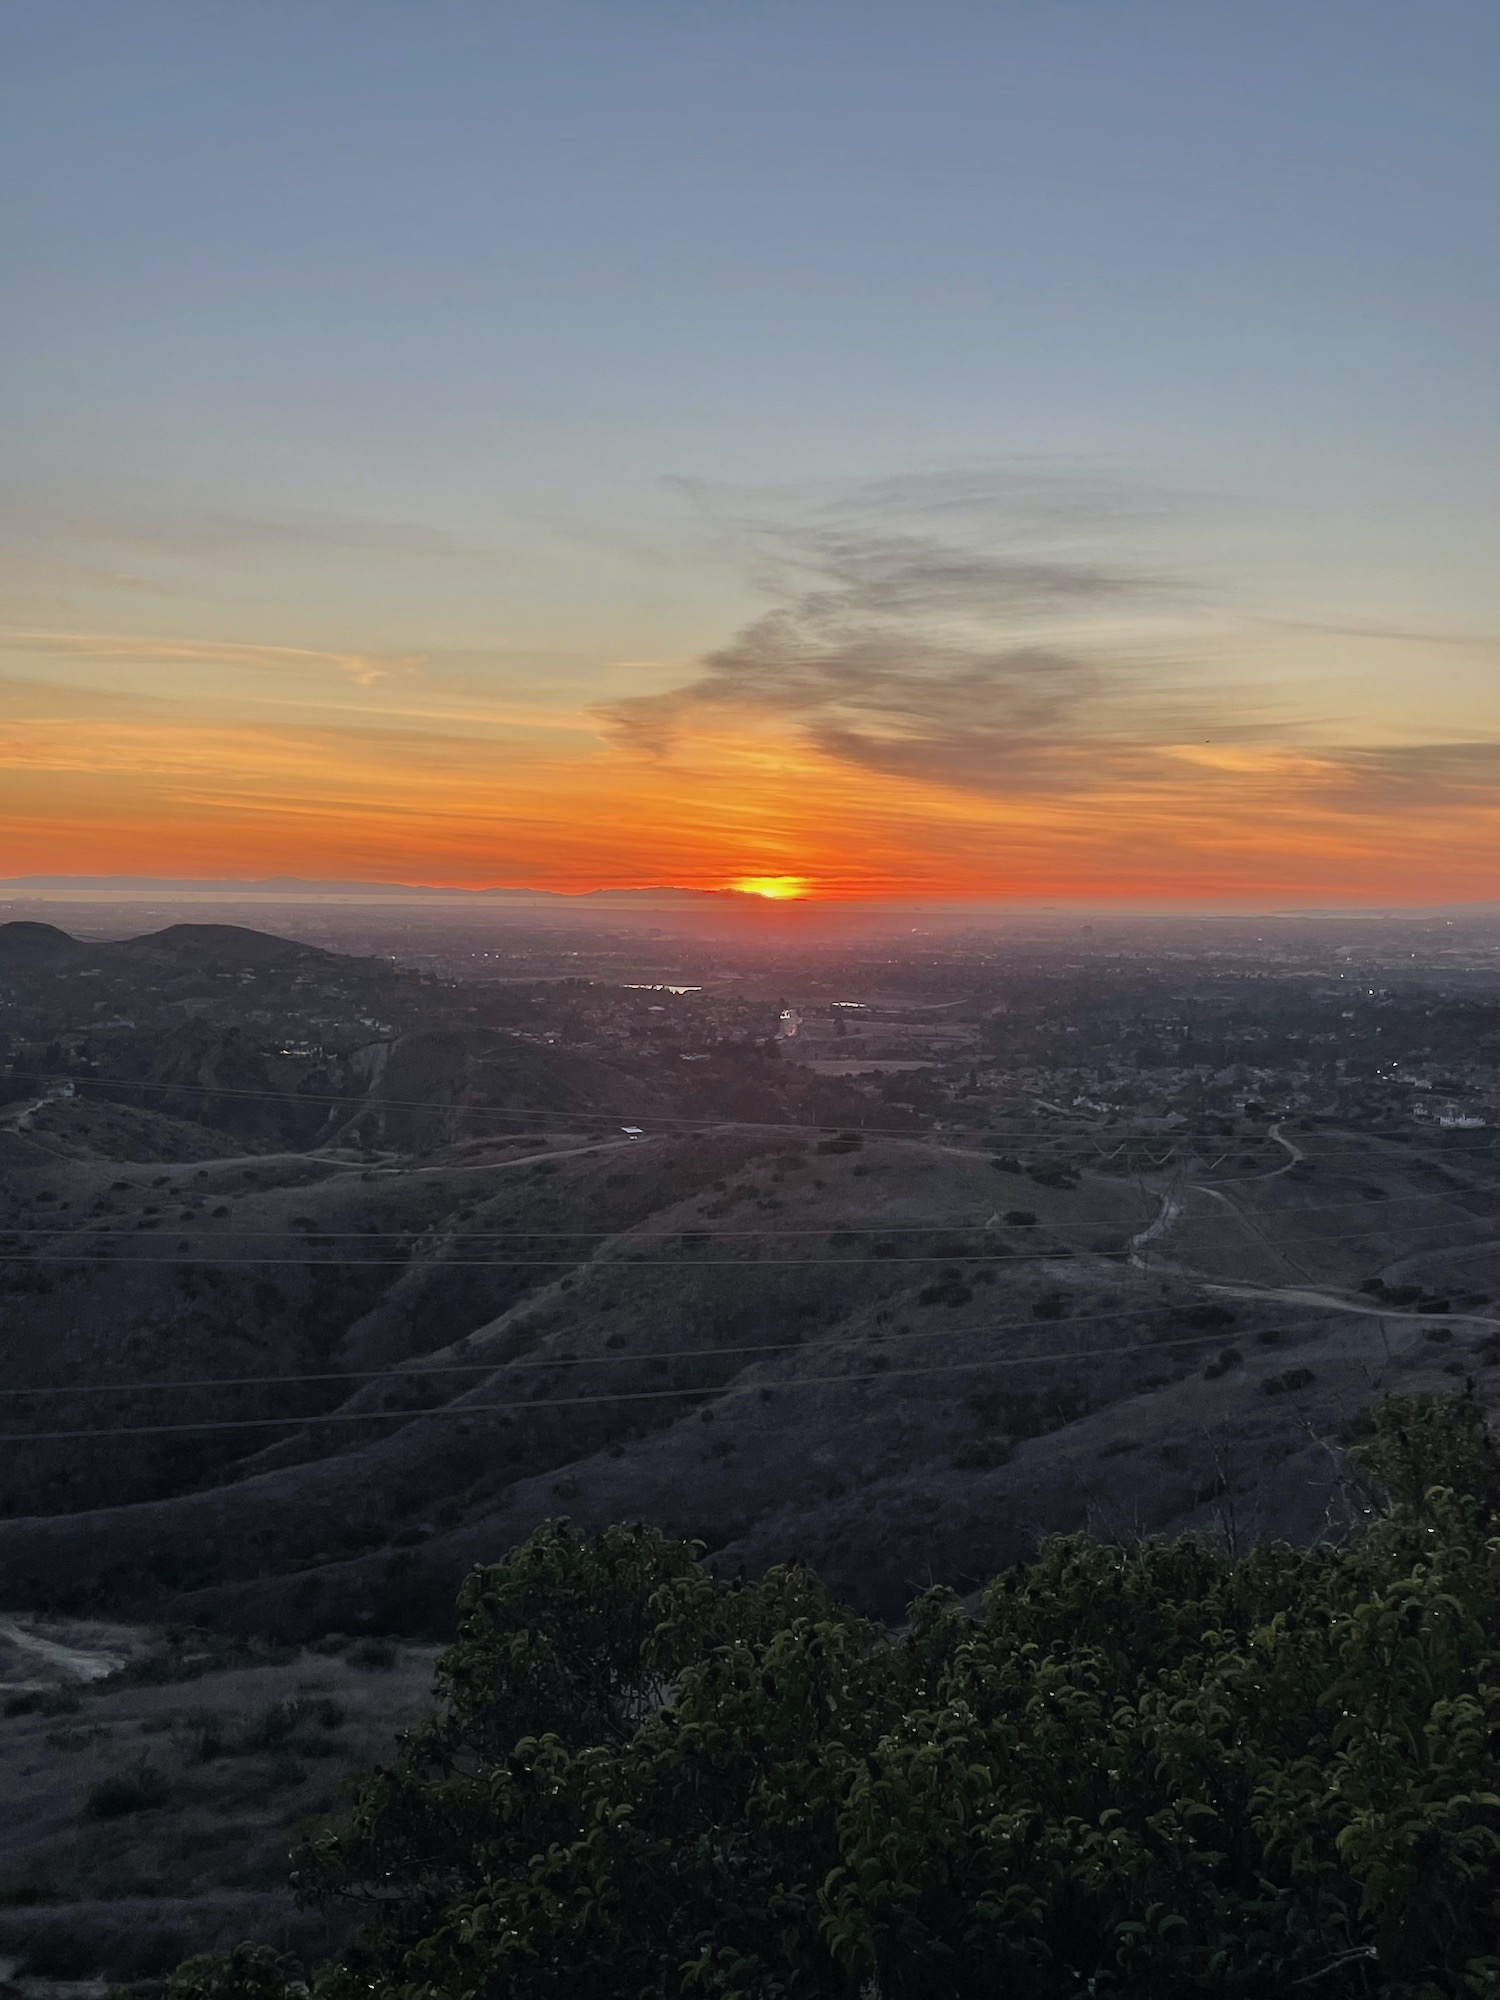 Sunset over pacific ocean - robbers roost vantage point - anaheim hills -1